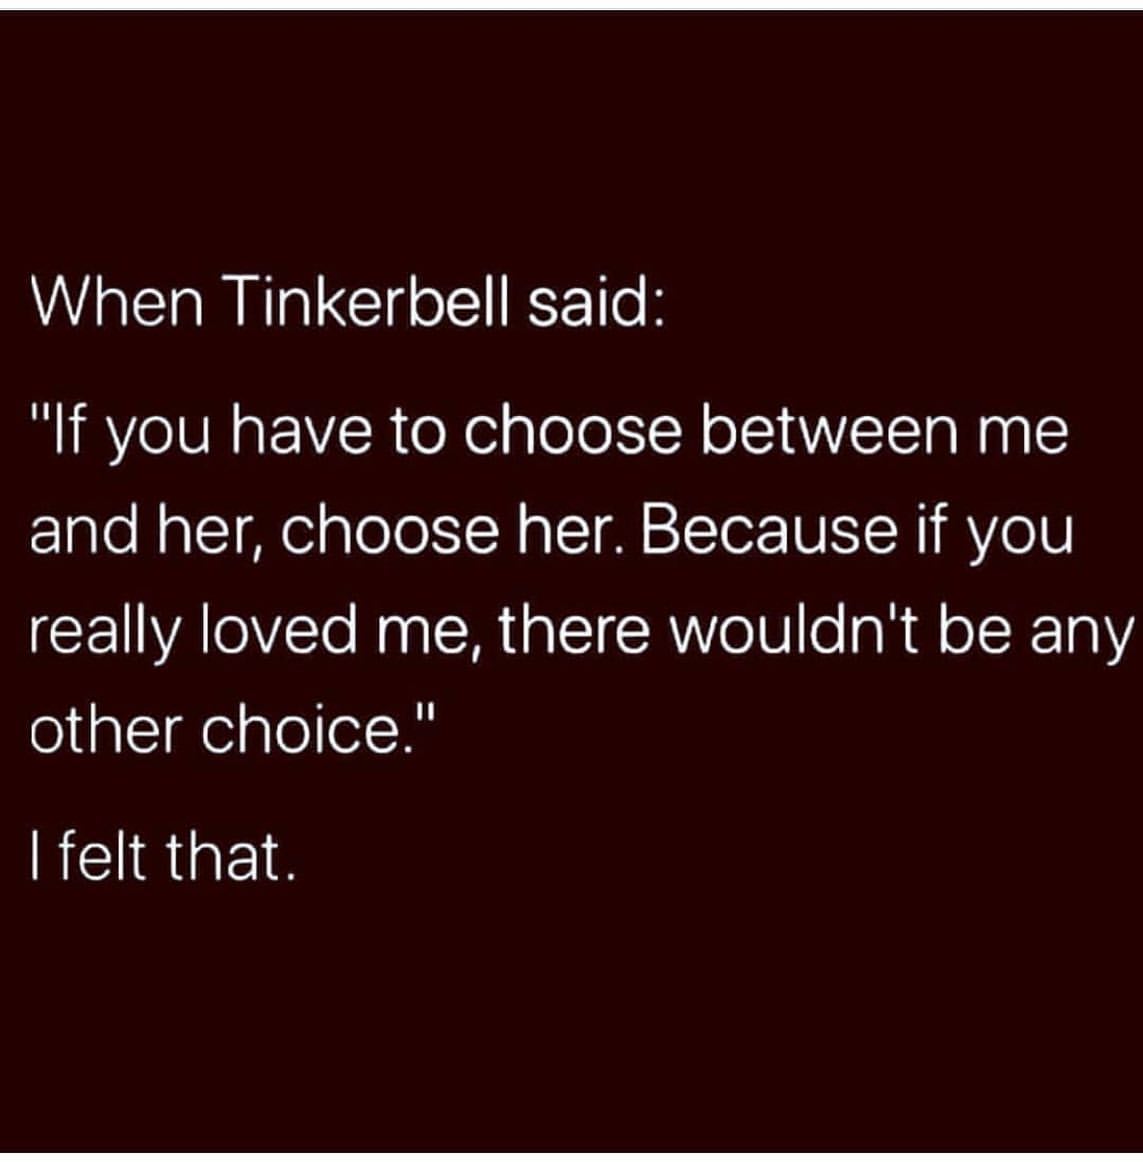 When Tinkerbell said: "If you have to choose between me and her, choose her. Because if you really loved me, there wouldn't be any other choice." I felt that.